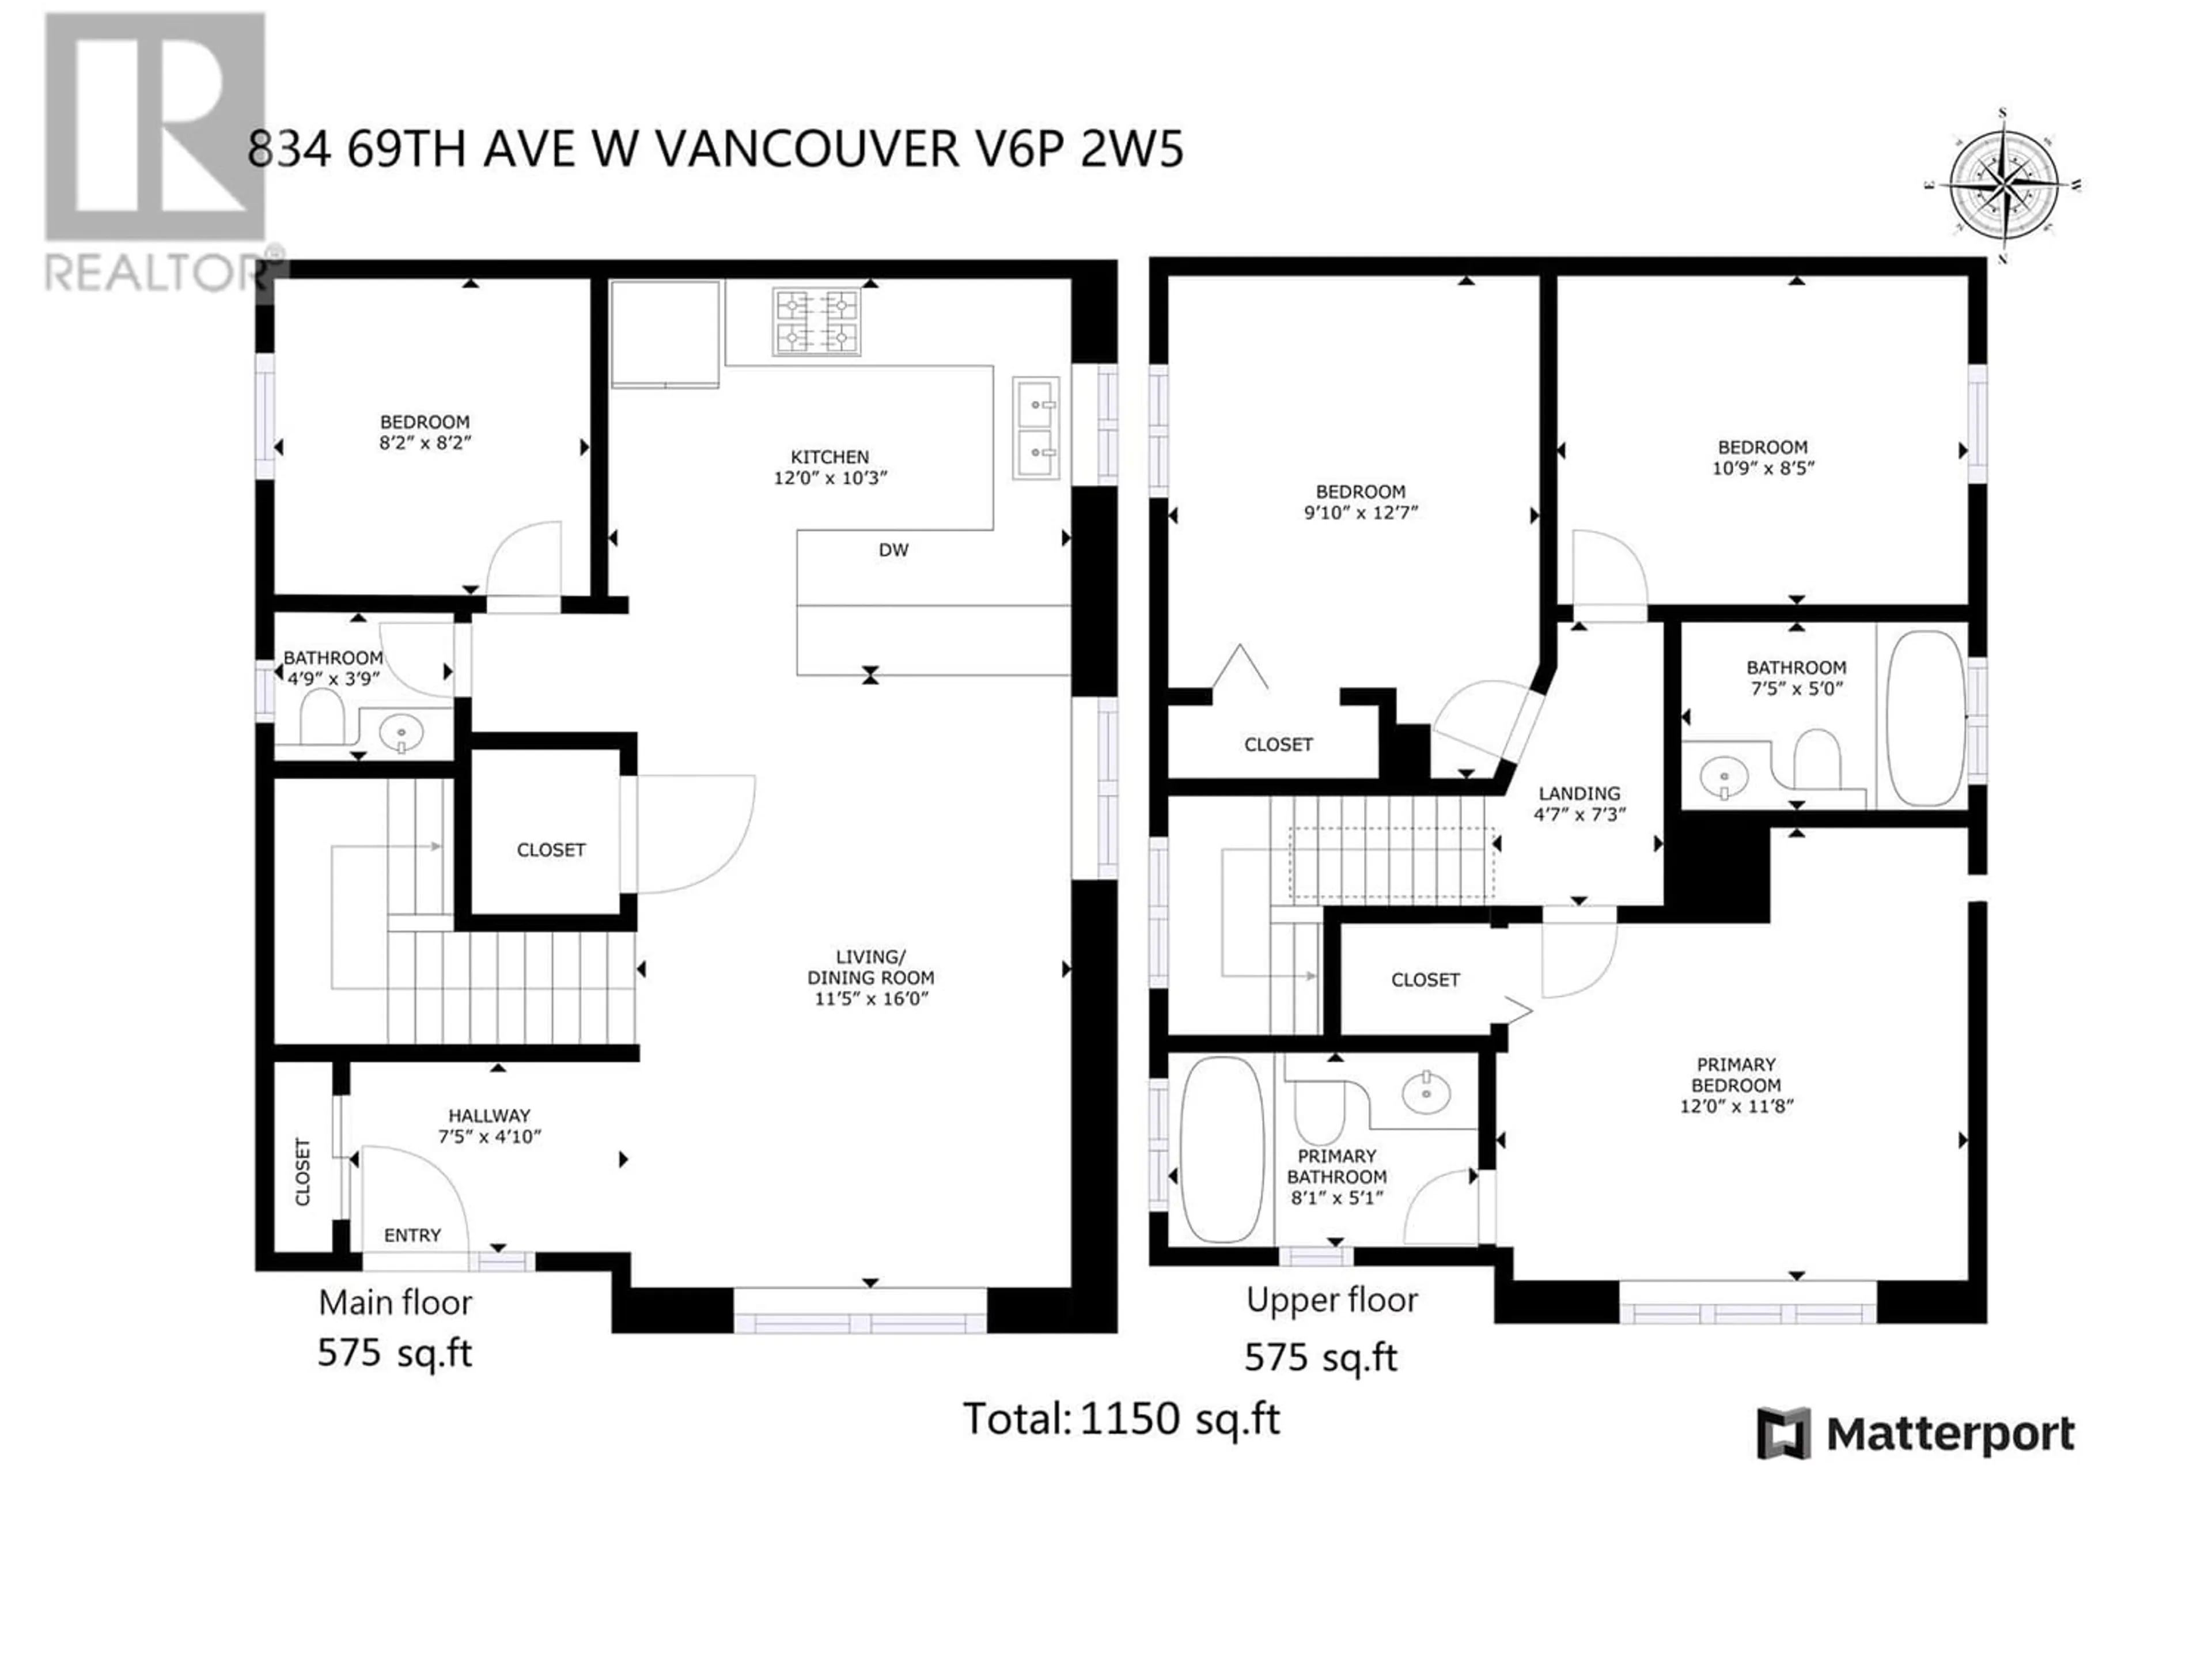 Floor plan for 834 W 69TH AVENUE, Vancouver British Columbia V6P2W5